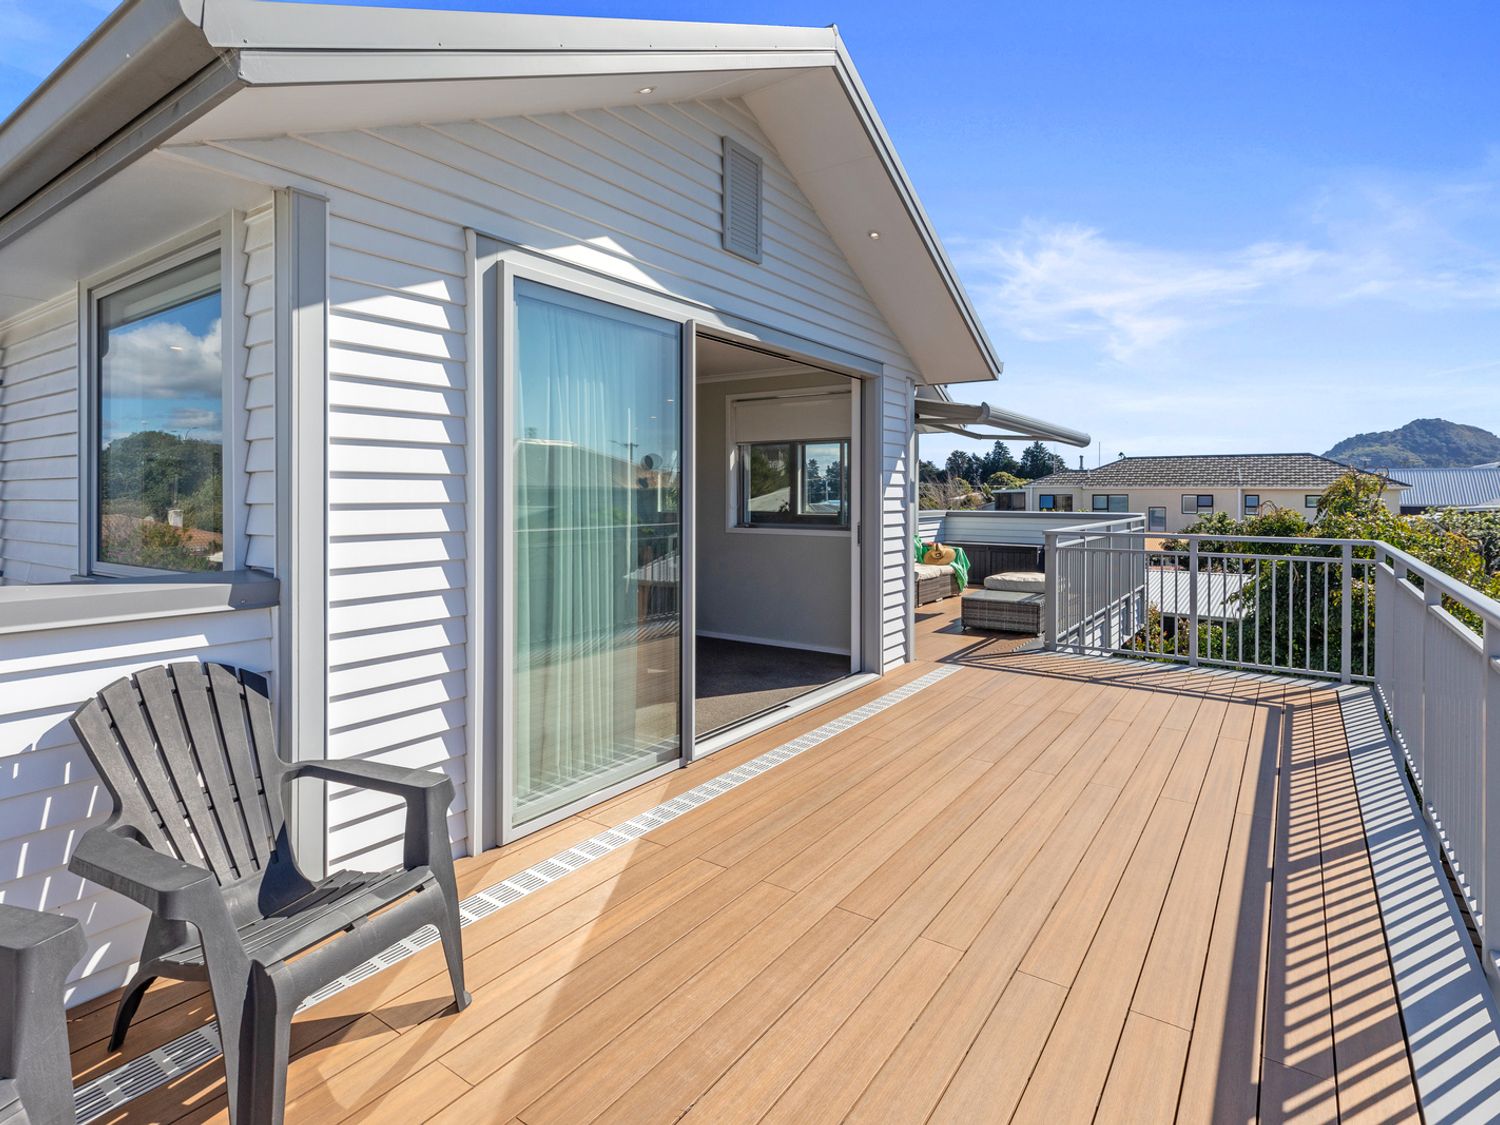 Campbell Road Classic – Mount Maunganui Bach -  - 1118171 - photo 1